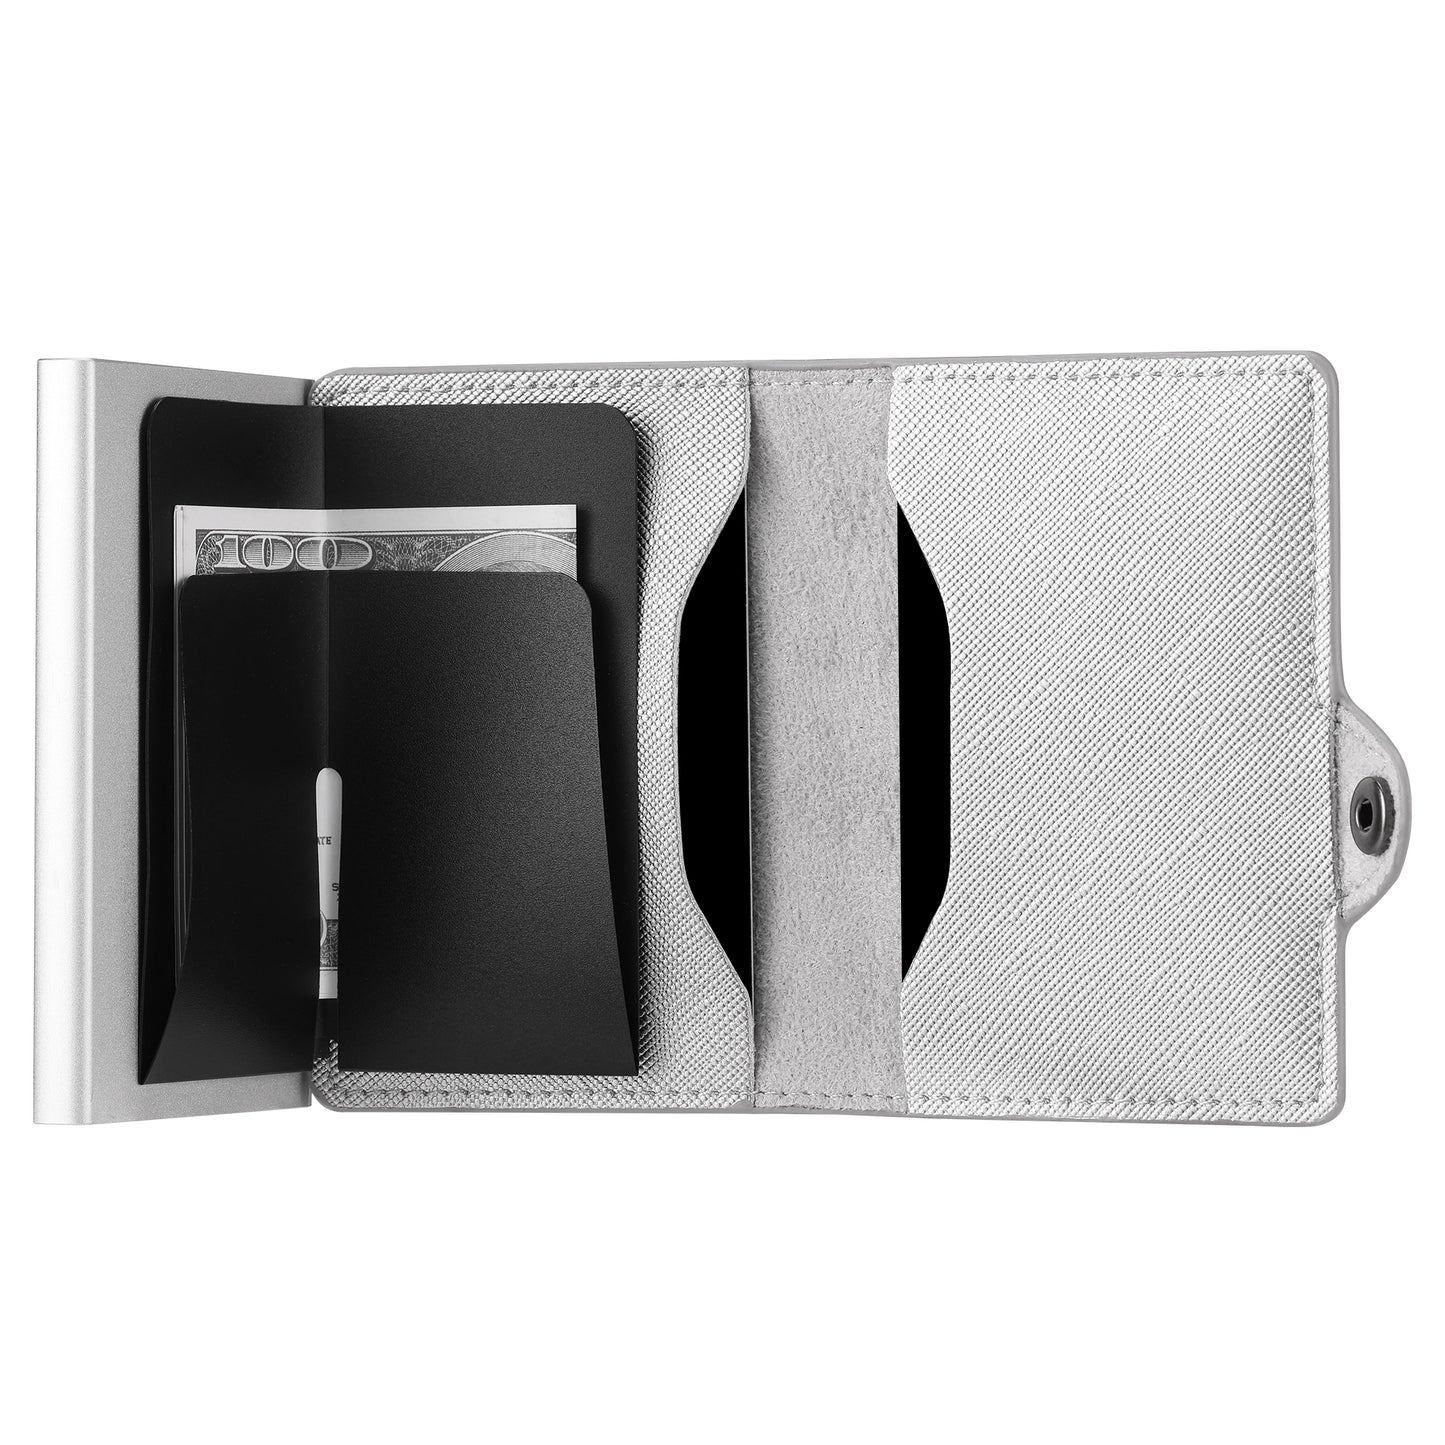 Card Blocr Credit Card Wallet for Women in Platinum Saffiano PU Leather | RFID Blocking